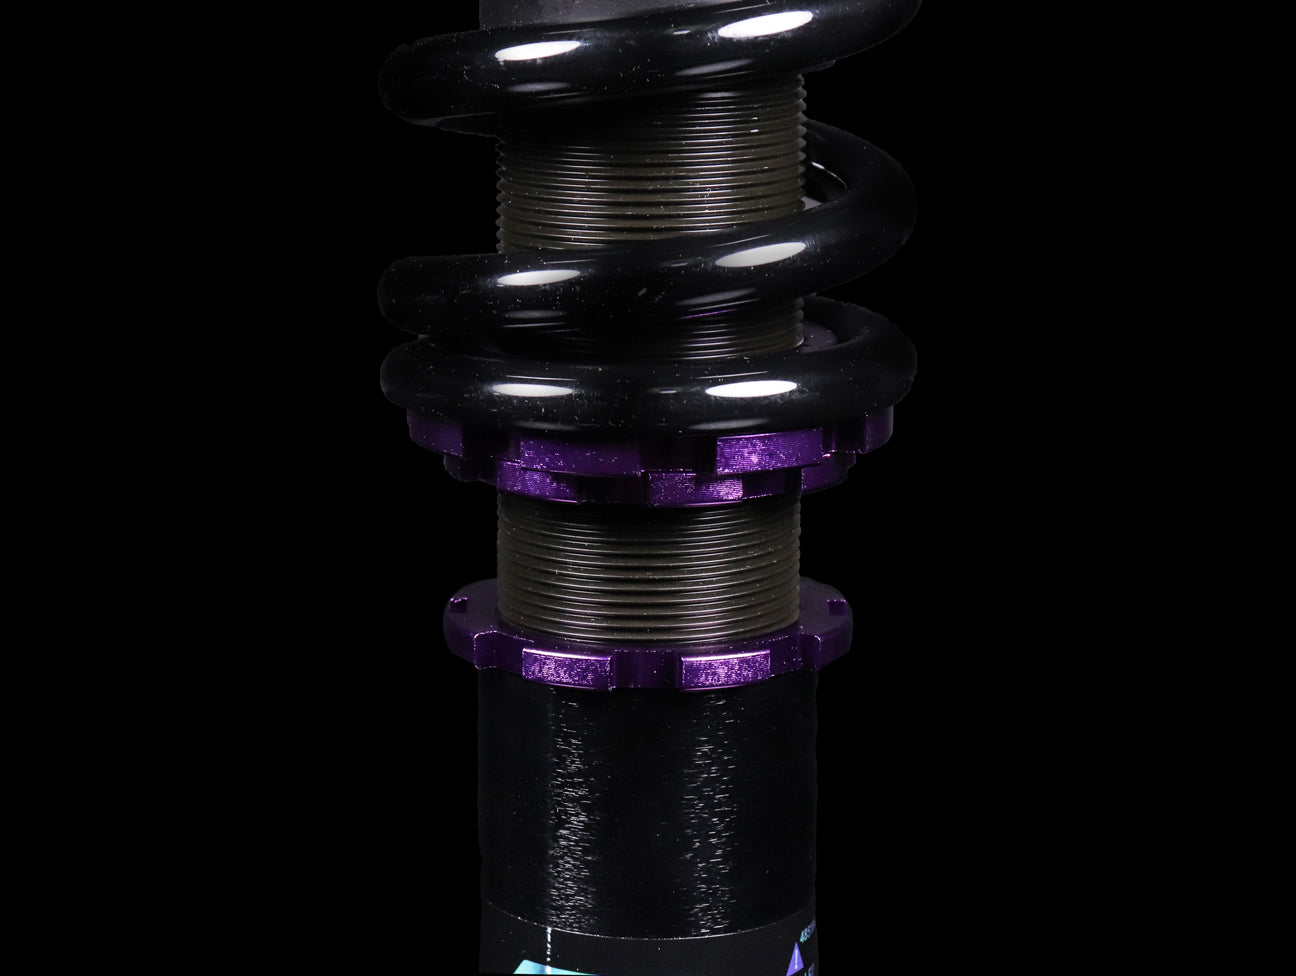 D2 Racing RS Coilover System - 00-09 S2000